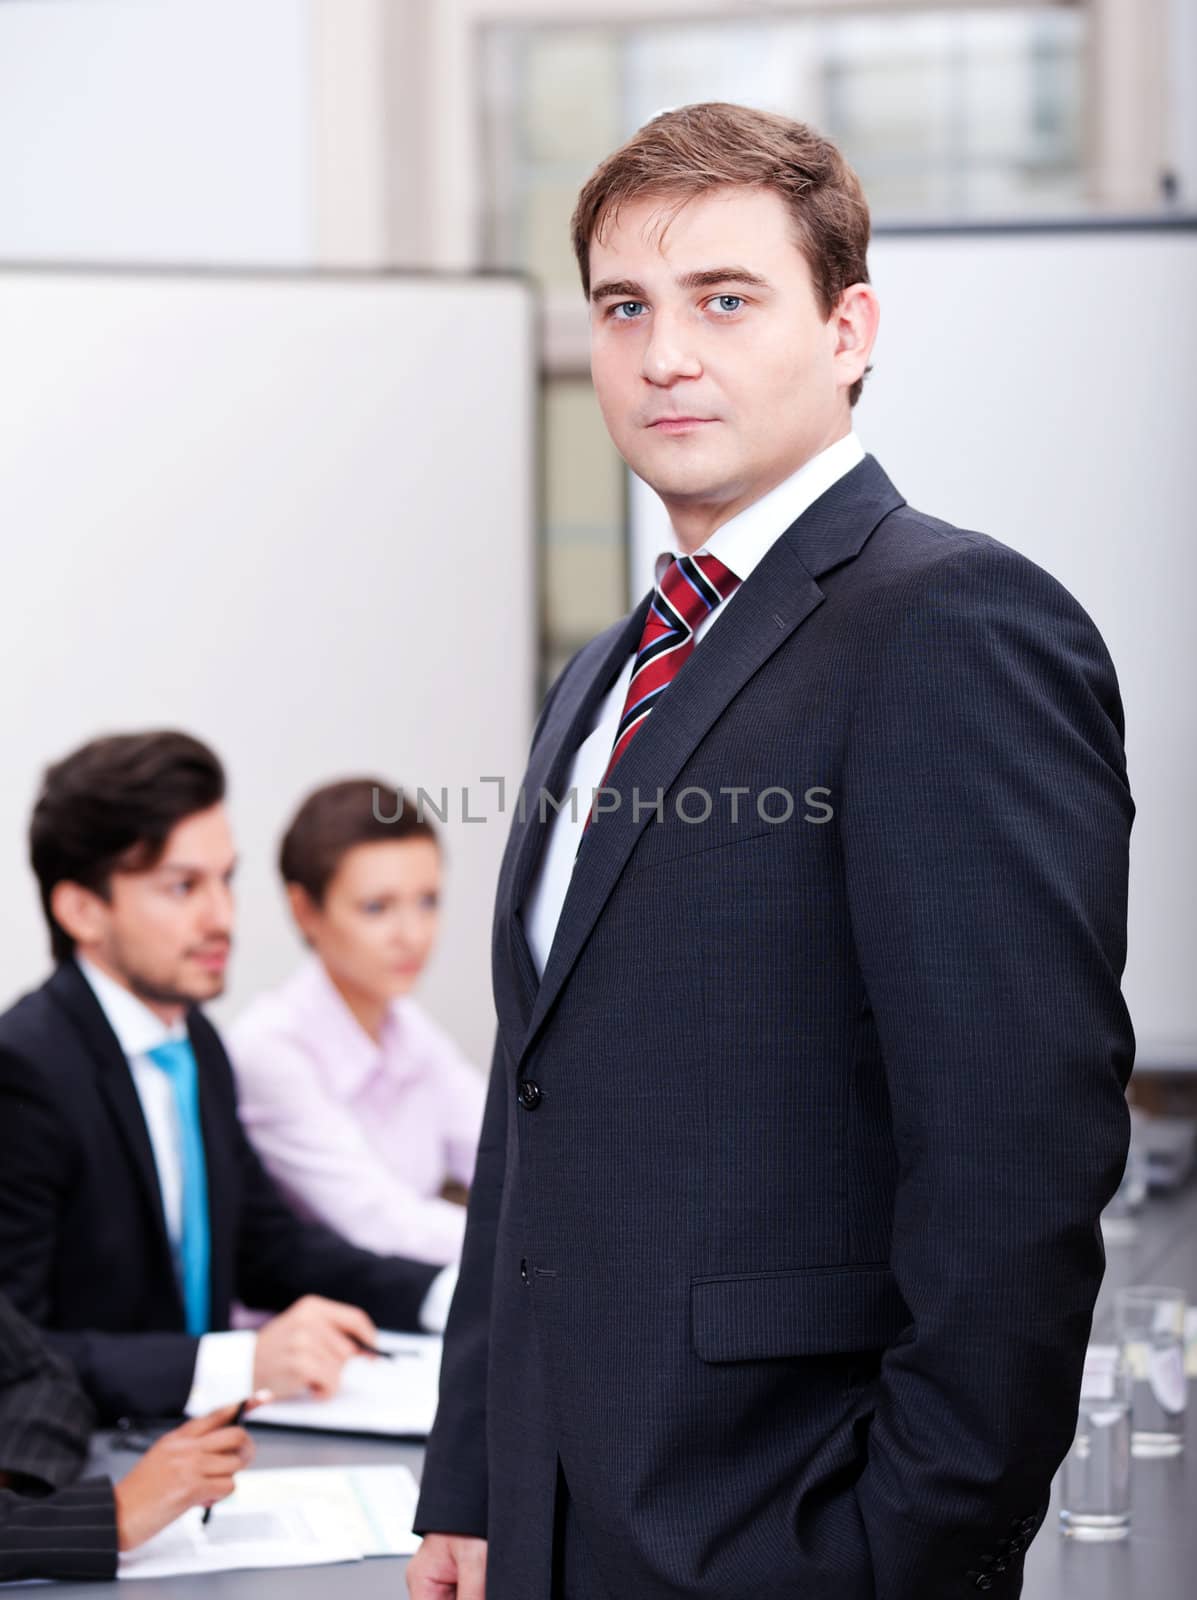 successful business smiling man portrait at office with team in background